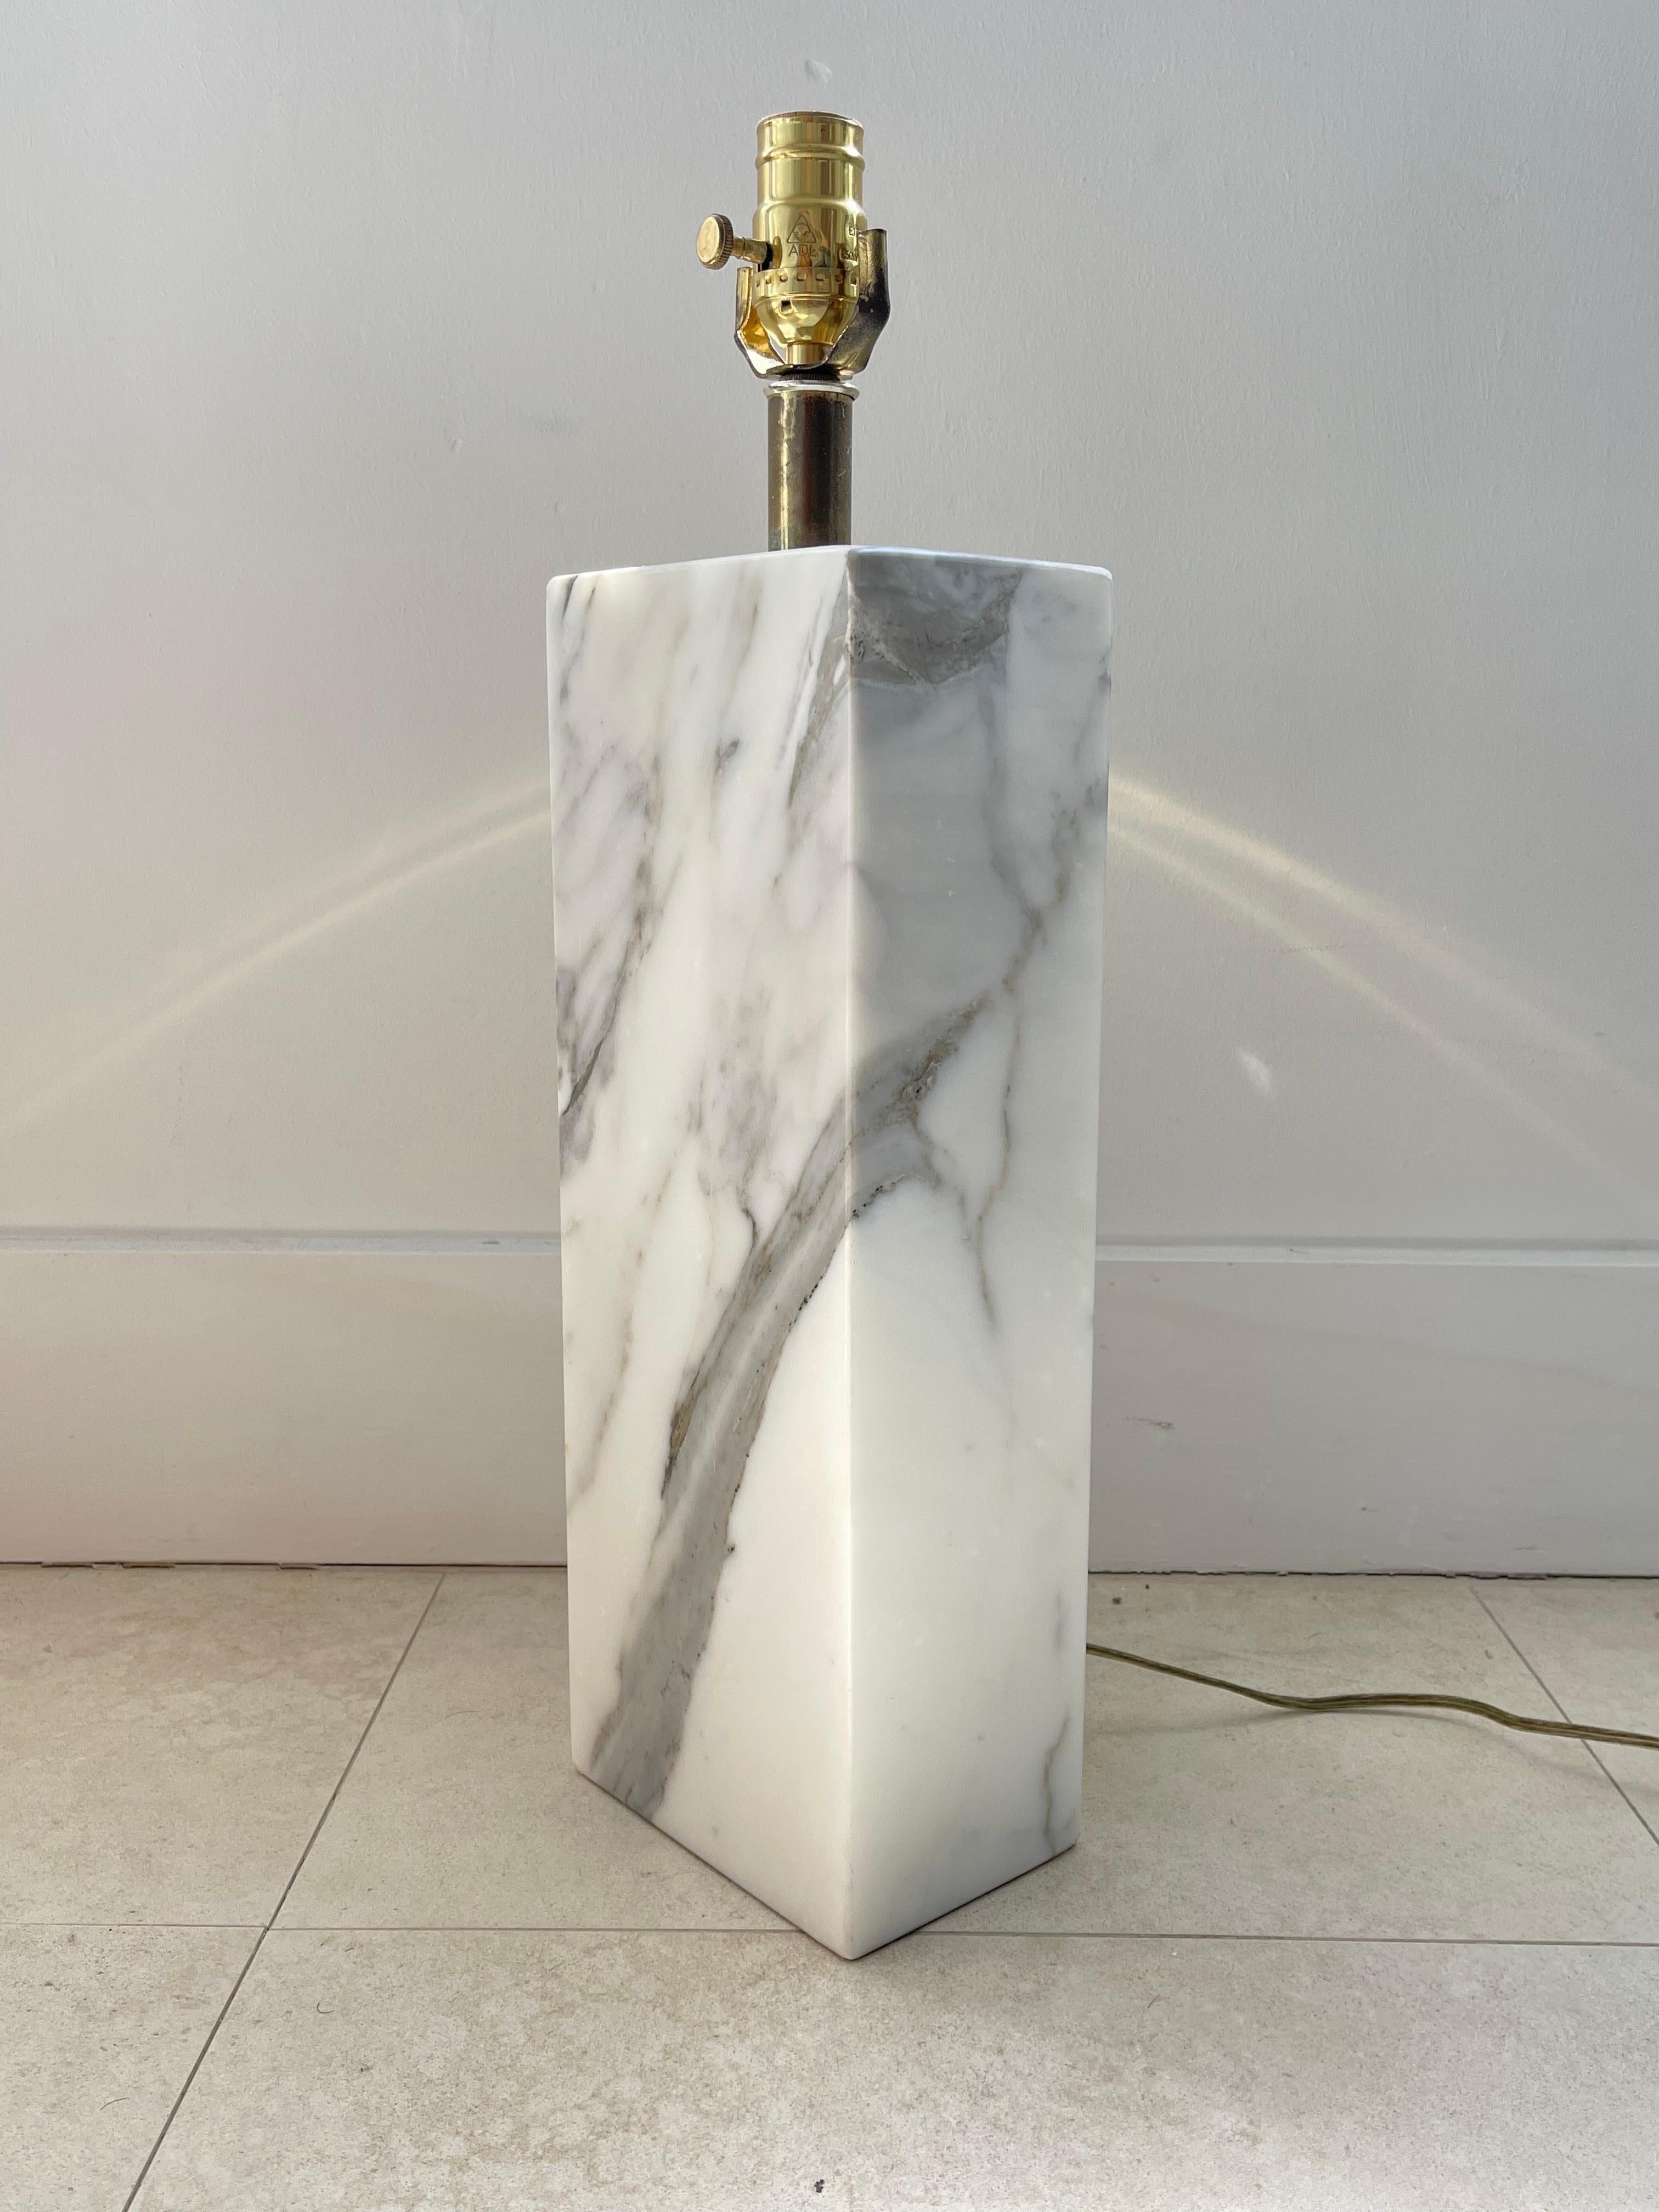 Polished Monolithic Elizabeth Kauffer Statuary Marble Table Lamp for Nessen Studio, 1950s For Sale